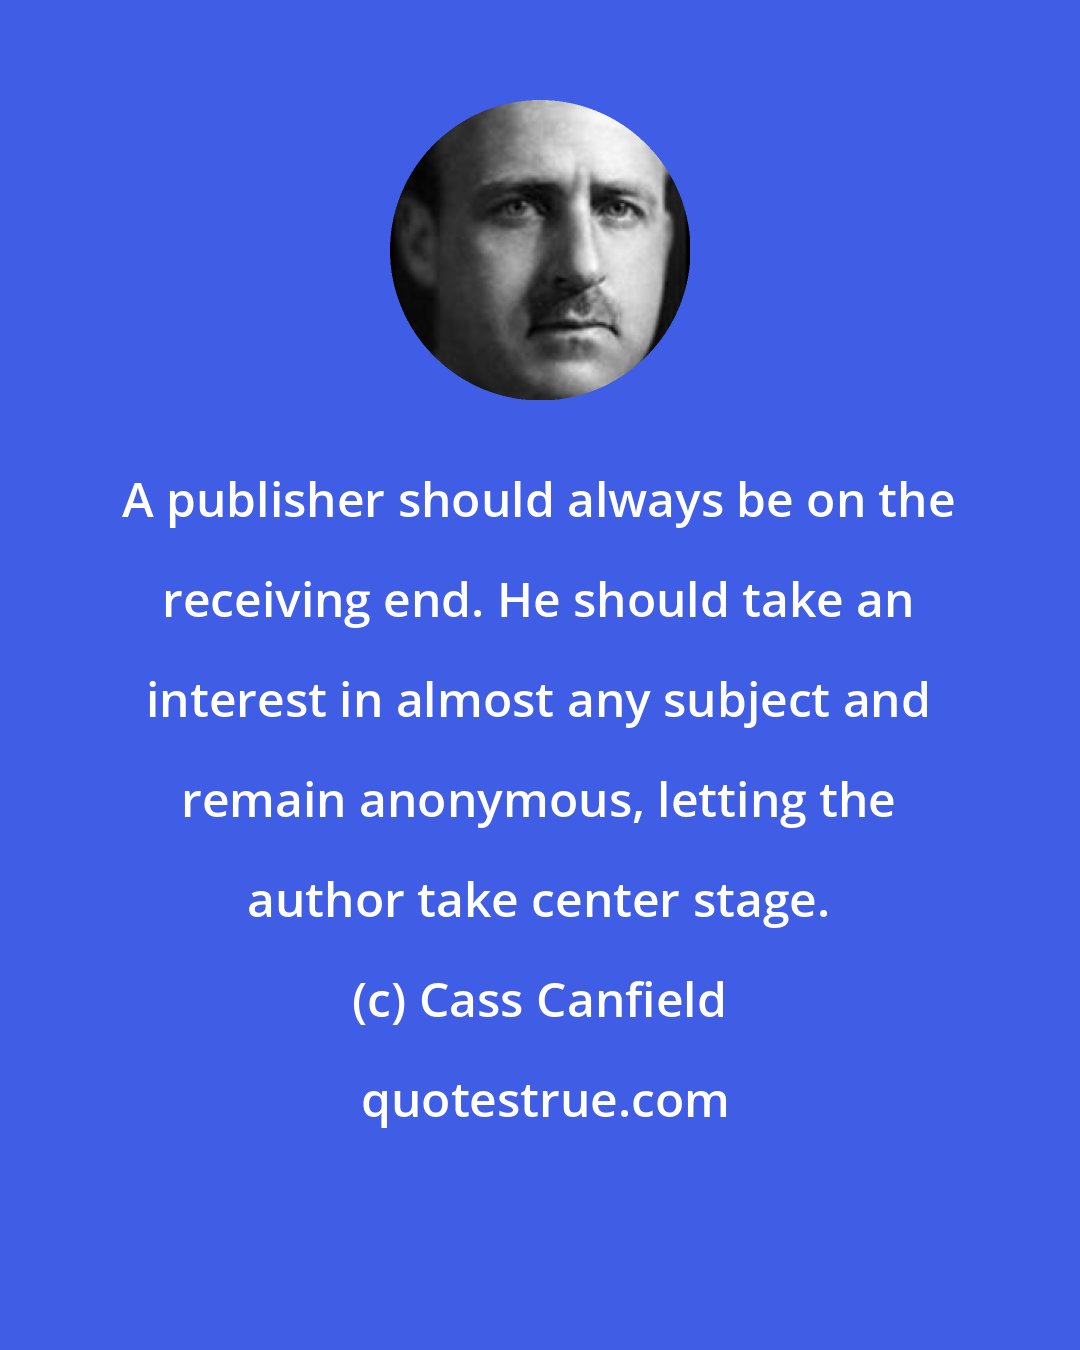 Cass Canfield: A publisher should always be on the receiving end. He should take an interest in almost any subject and remain anonymous, letting the author take center stage.